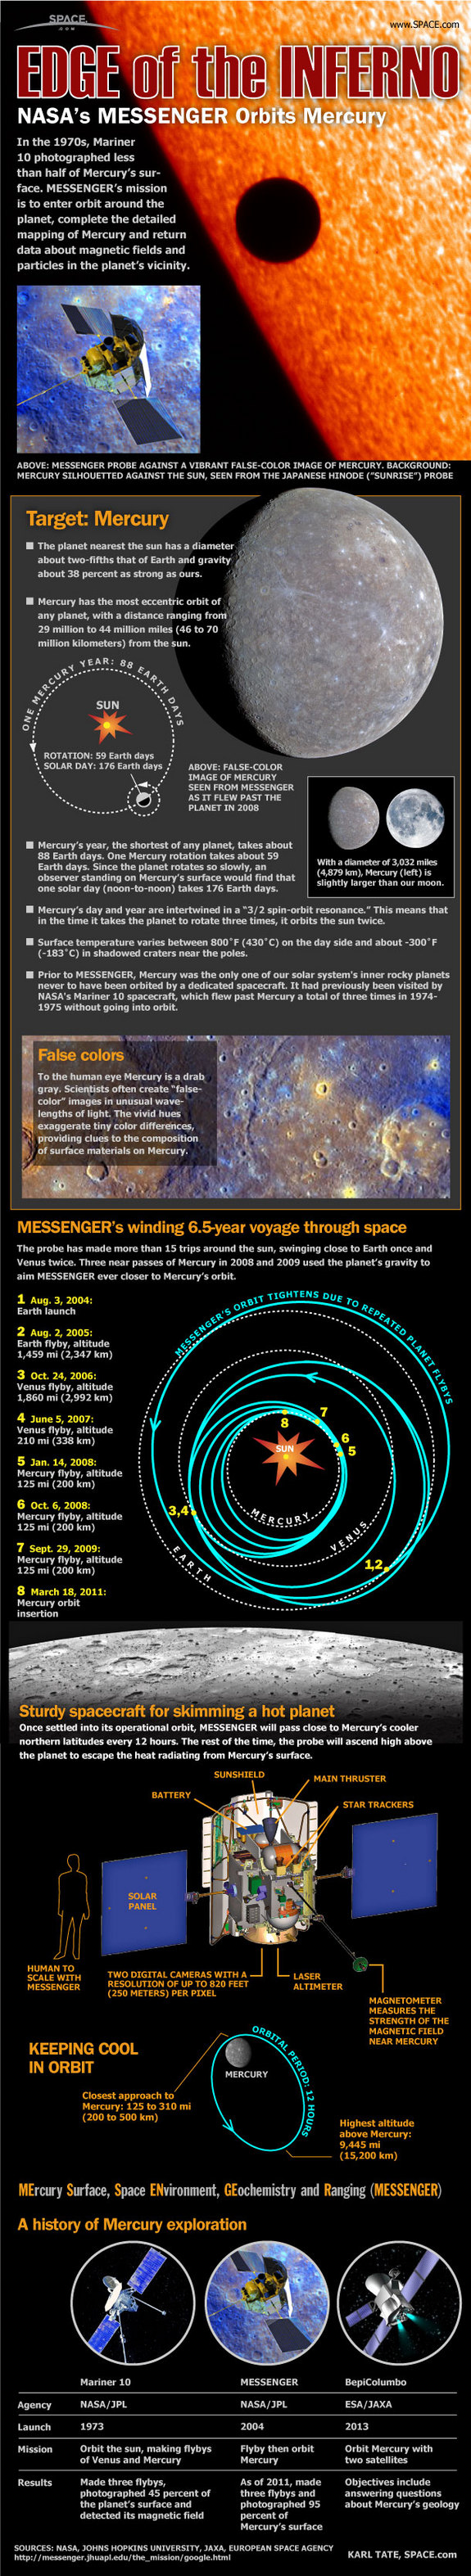 Learn more about NASA's Messenger mission, the first ever set to orbit the planet Mercury, in this SPACE.com infographic.